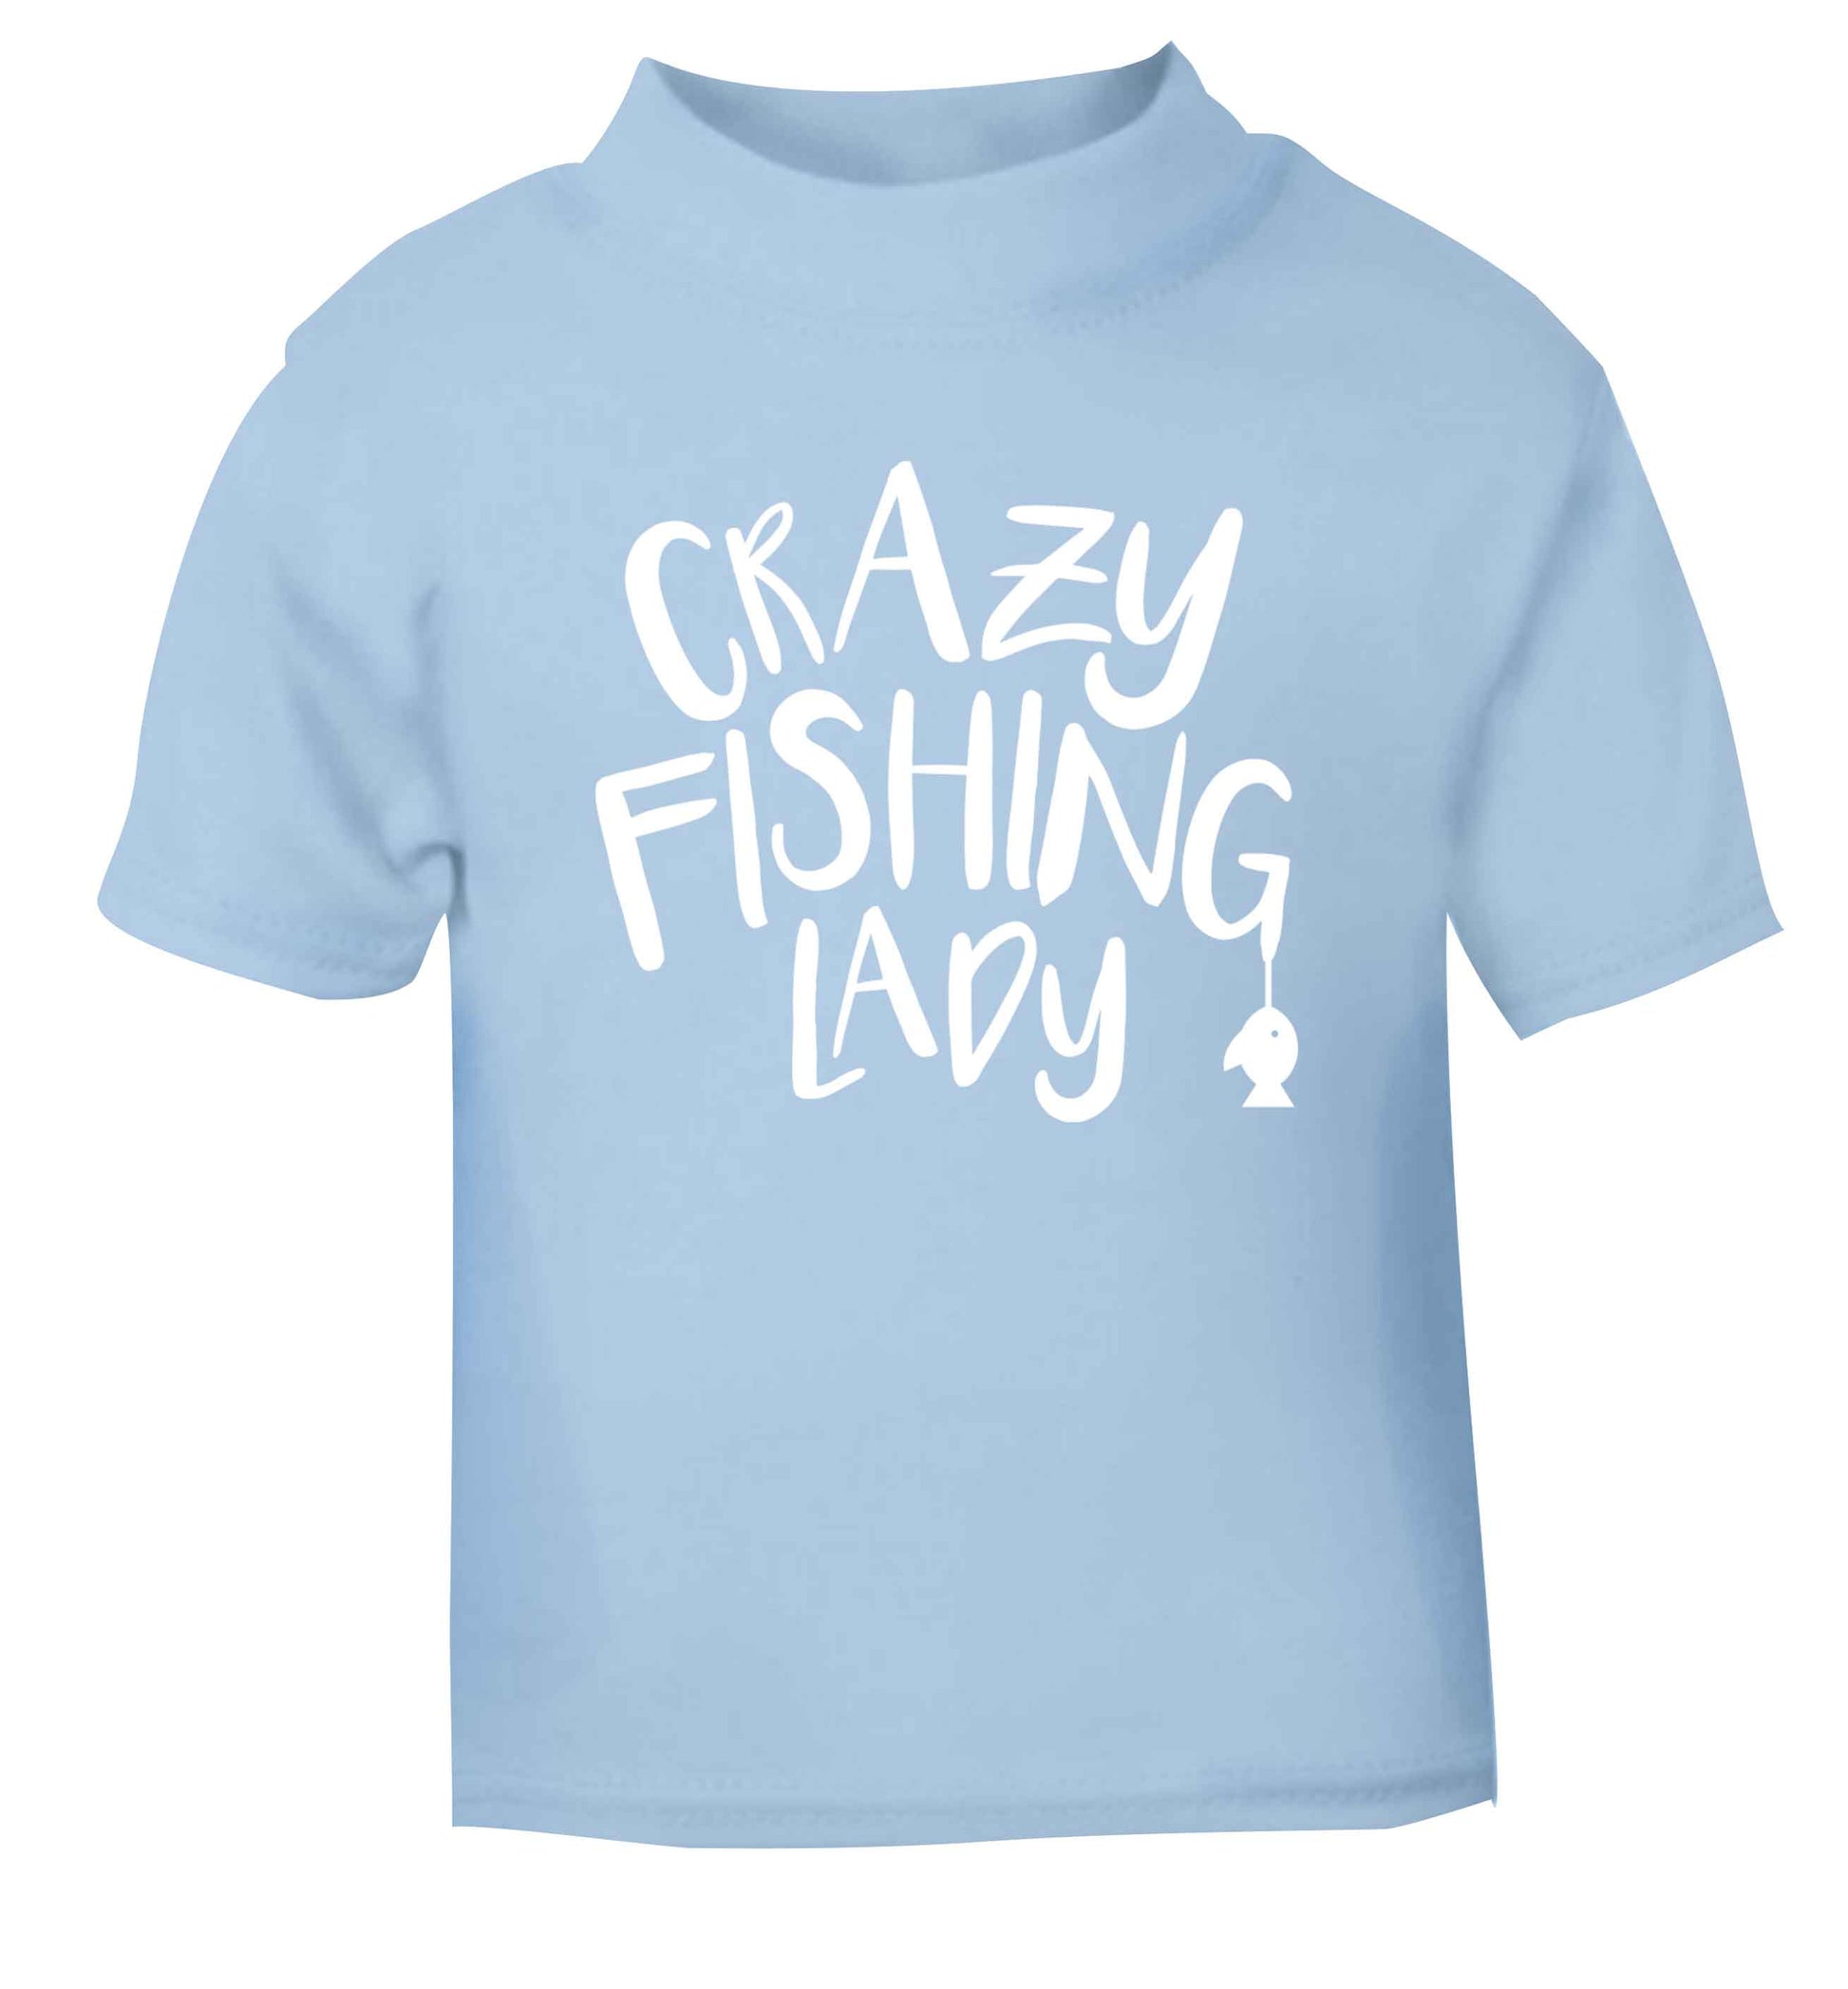 Crazy fishing lady light blue Baby Toddler Tshirt 2 Years